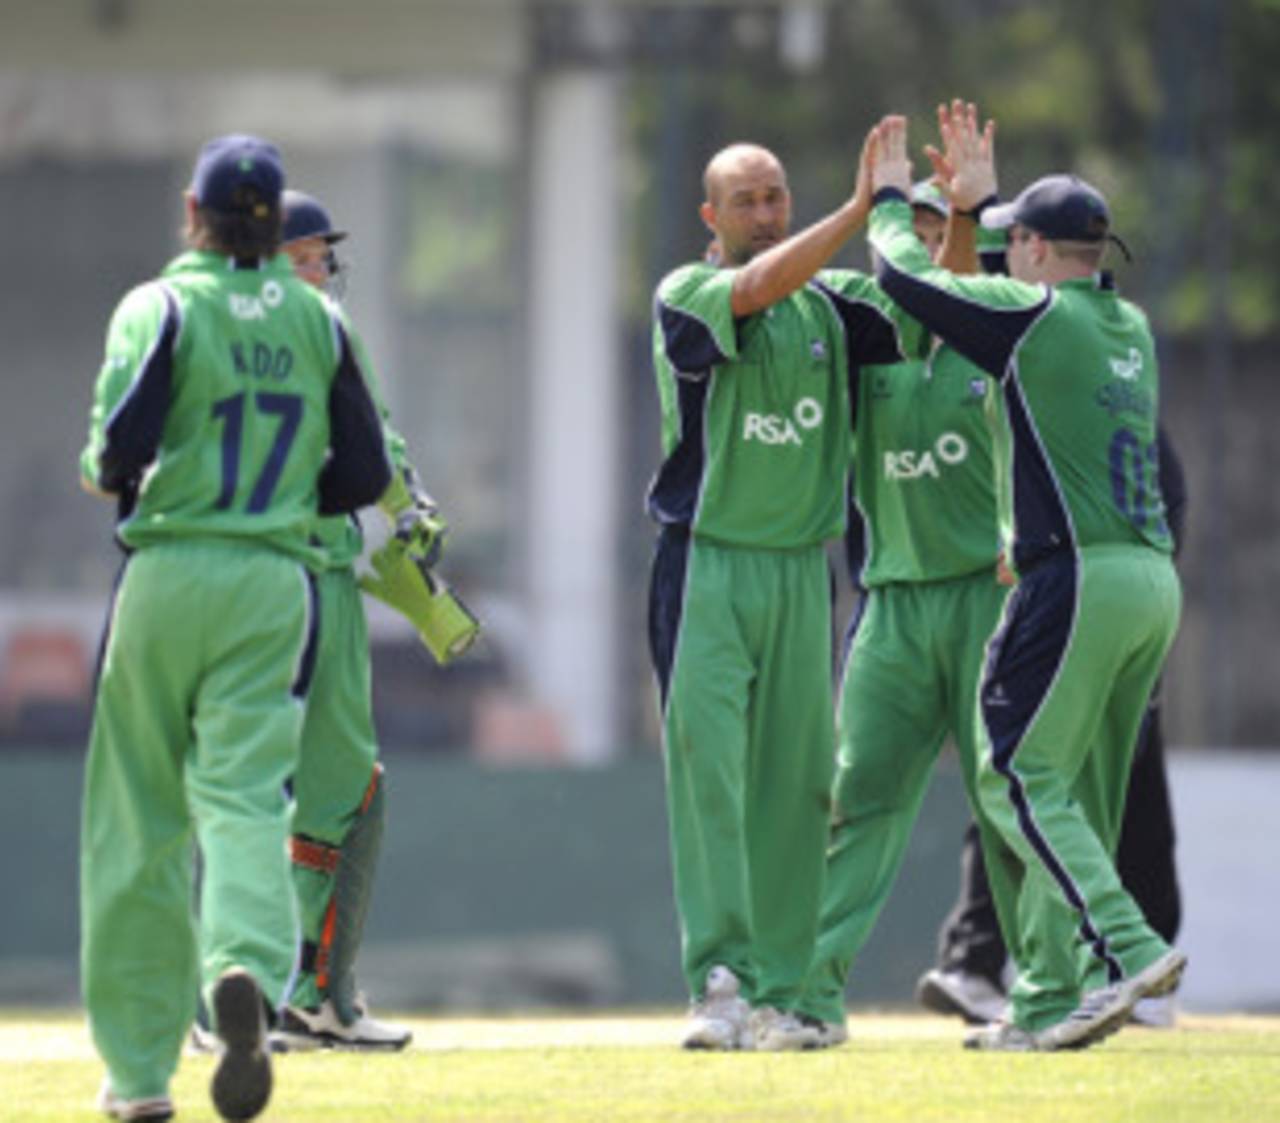 Ireland are competing in the ongoing Intercontinental One-Day Cup&nbsp;&nbsp;&bull;&nbsp;&nbsp;ESPNcricinfo Ltd